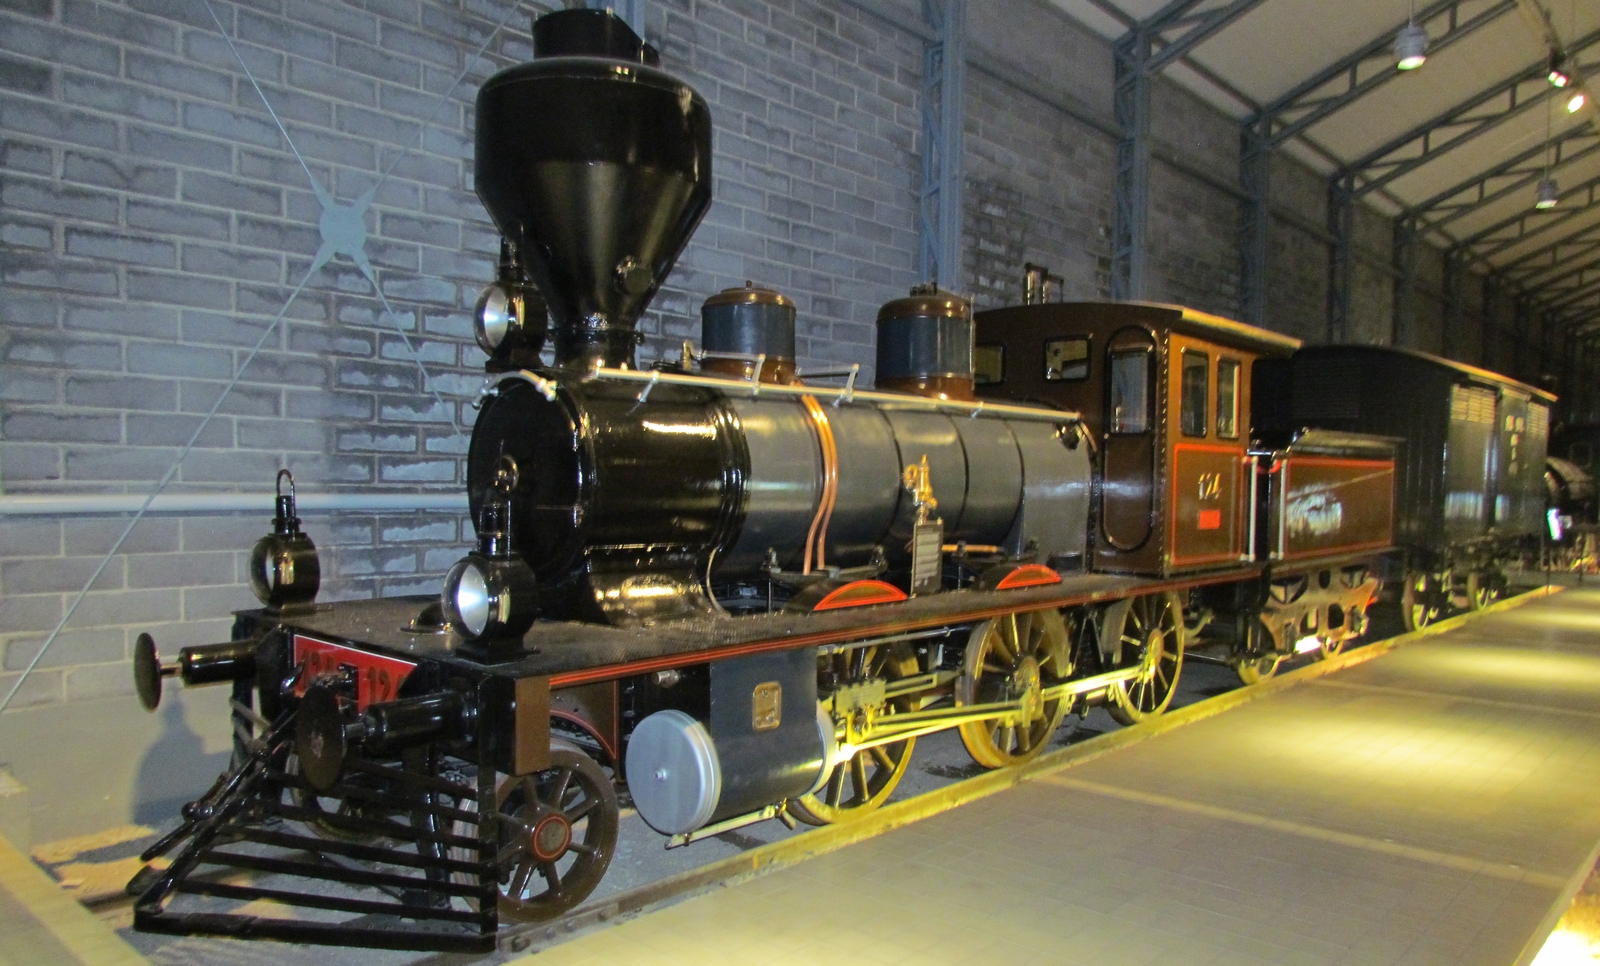 No. 124 in the Hyvinkaa Railway Museum